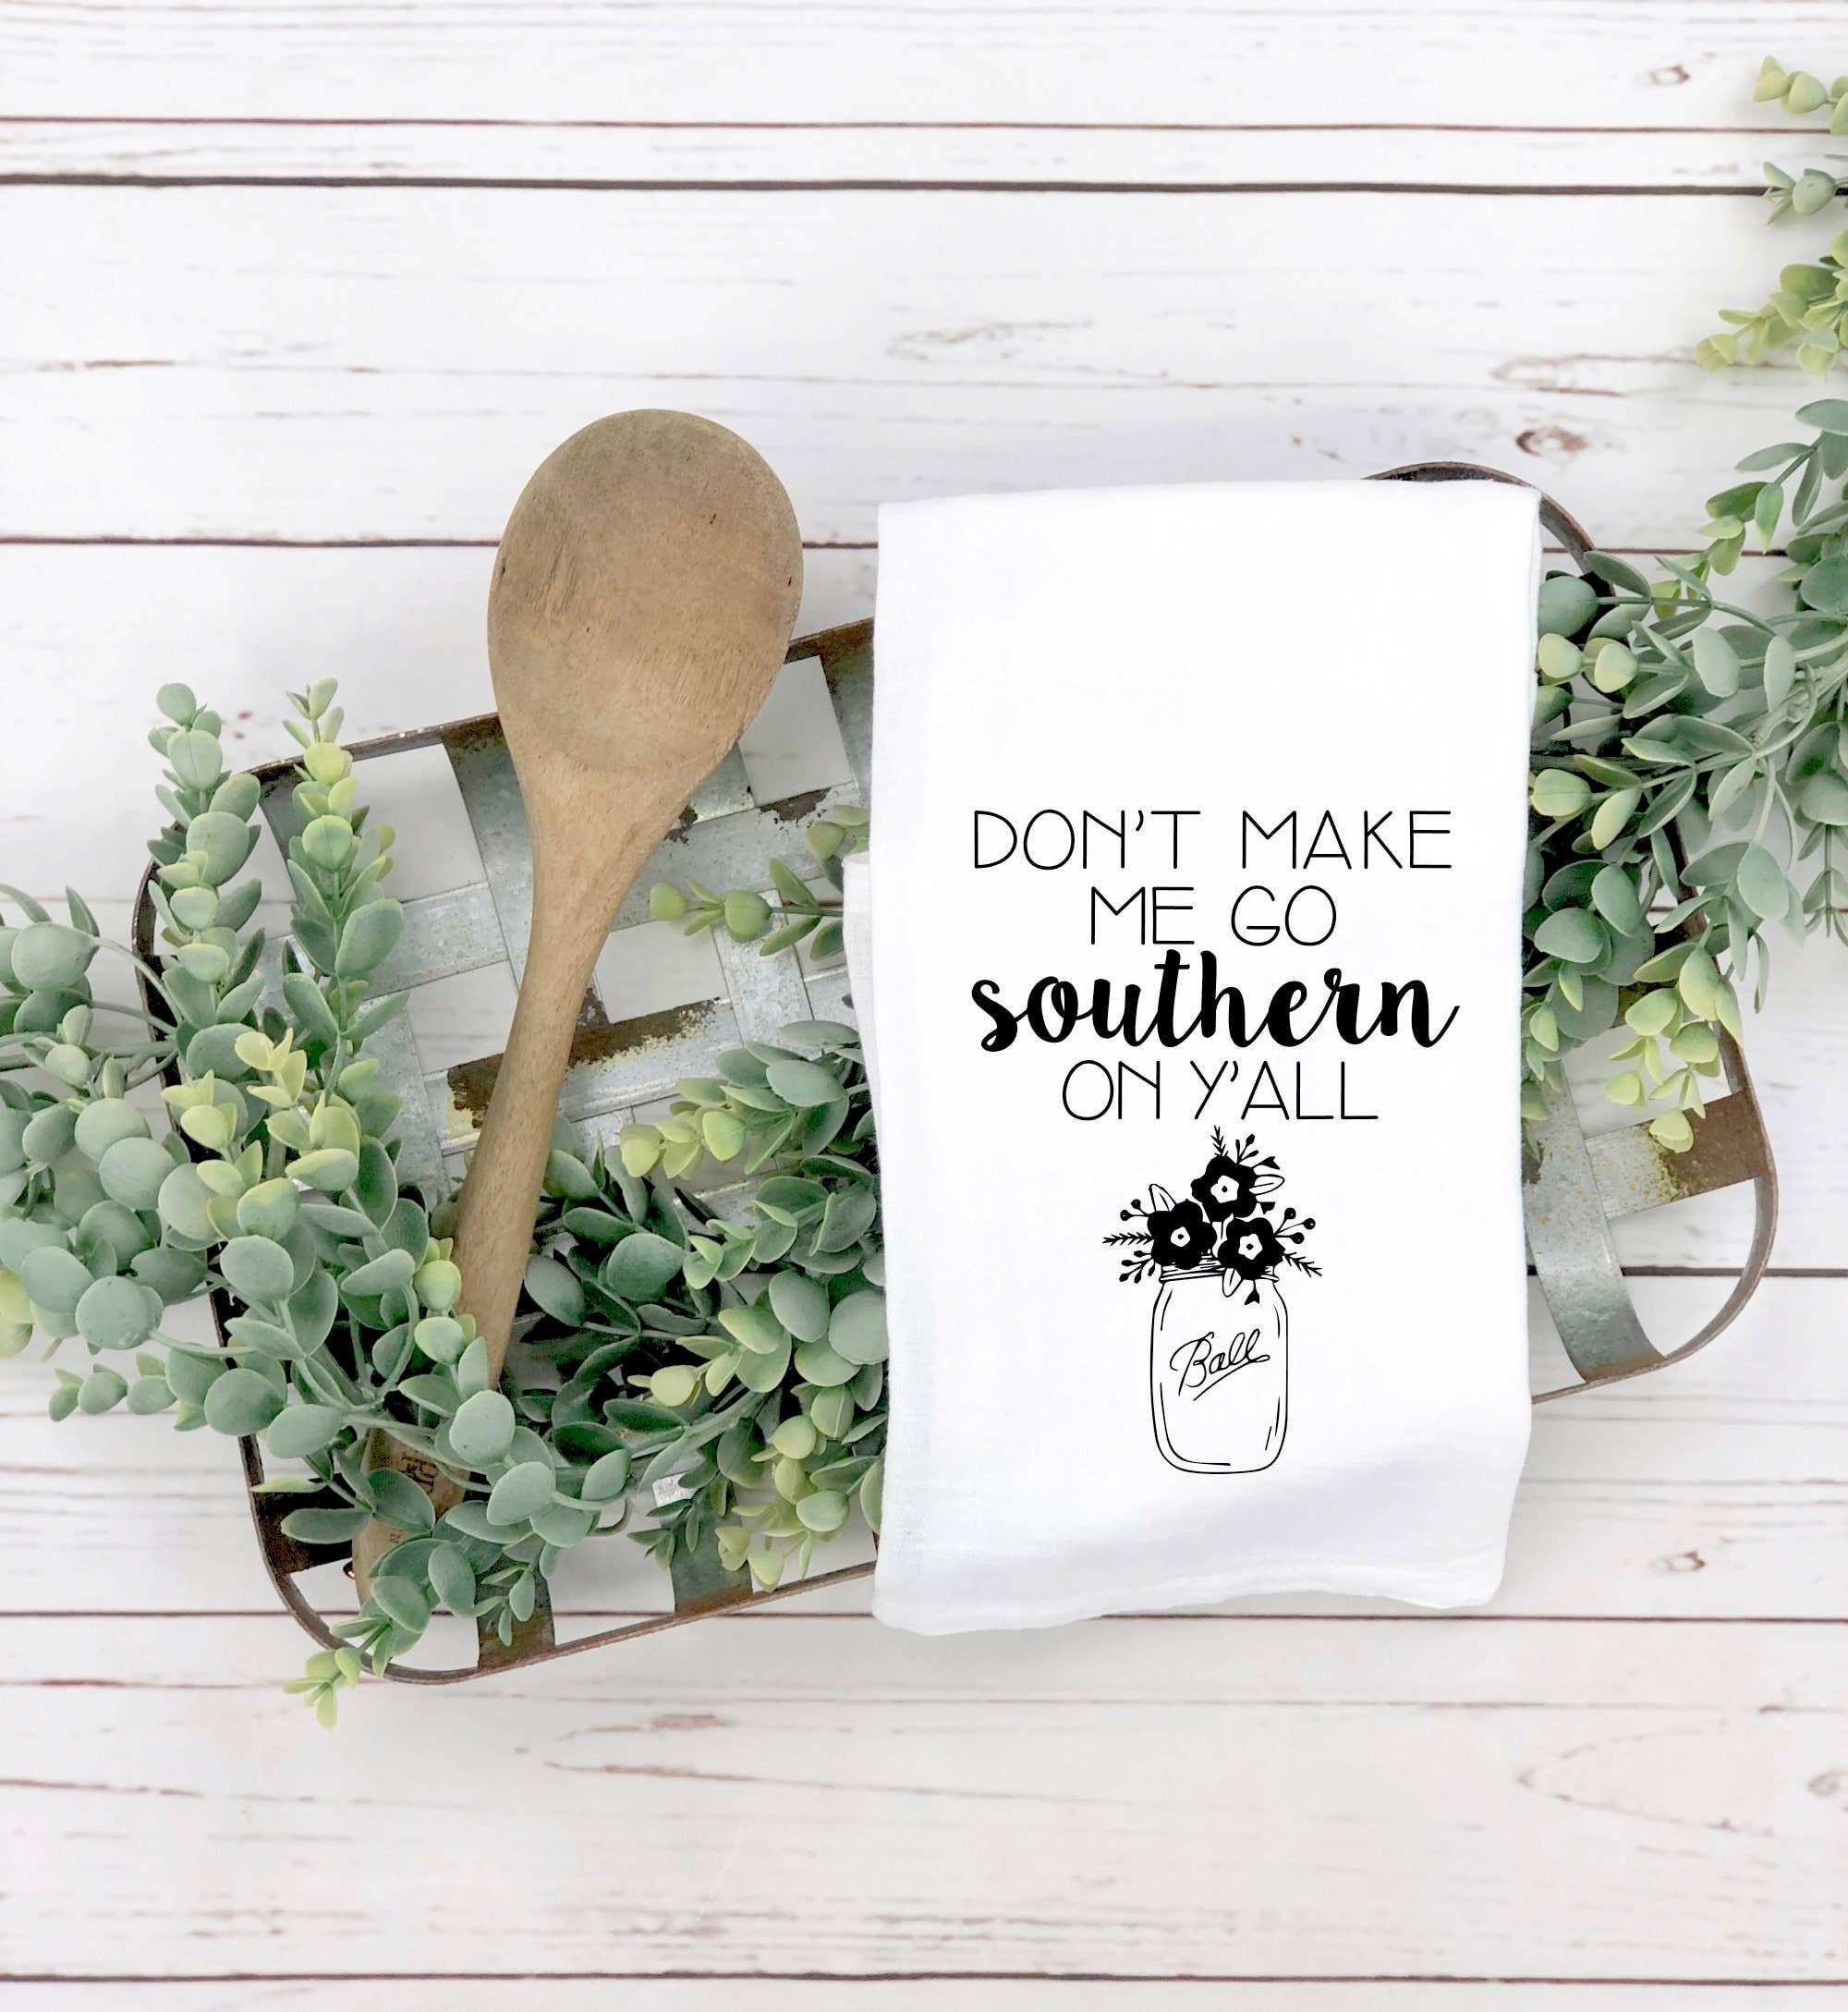 This "Don't Make Me Go Southern on Y'all" tea towel is the perfect gift idea for those who appreciate a touch of Southern charm in their kitchen.